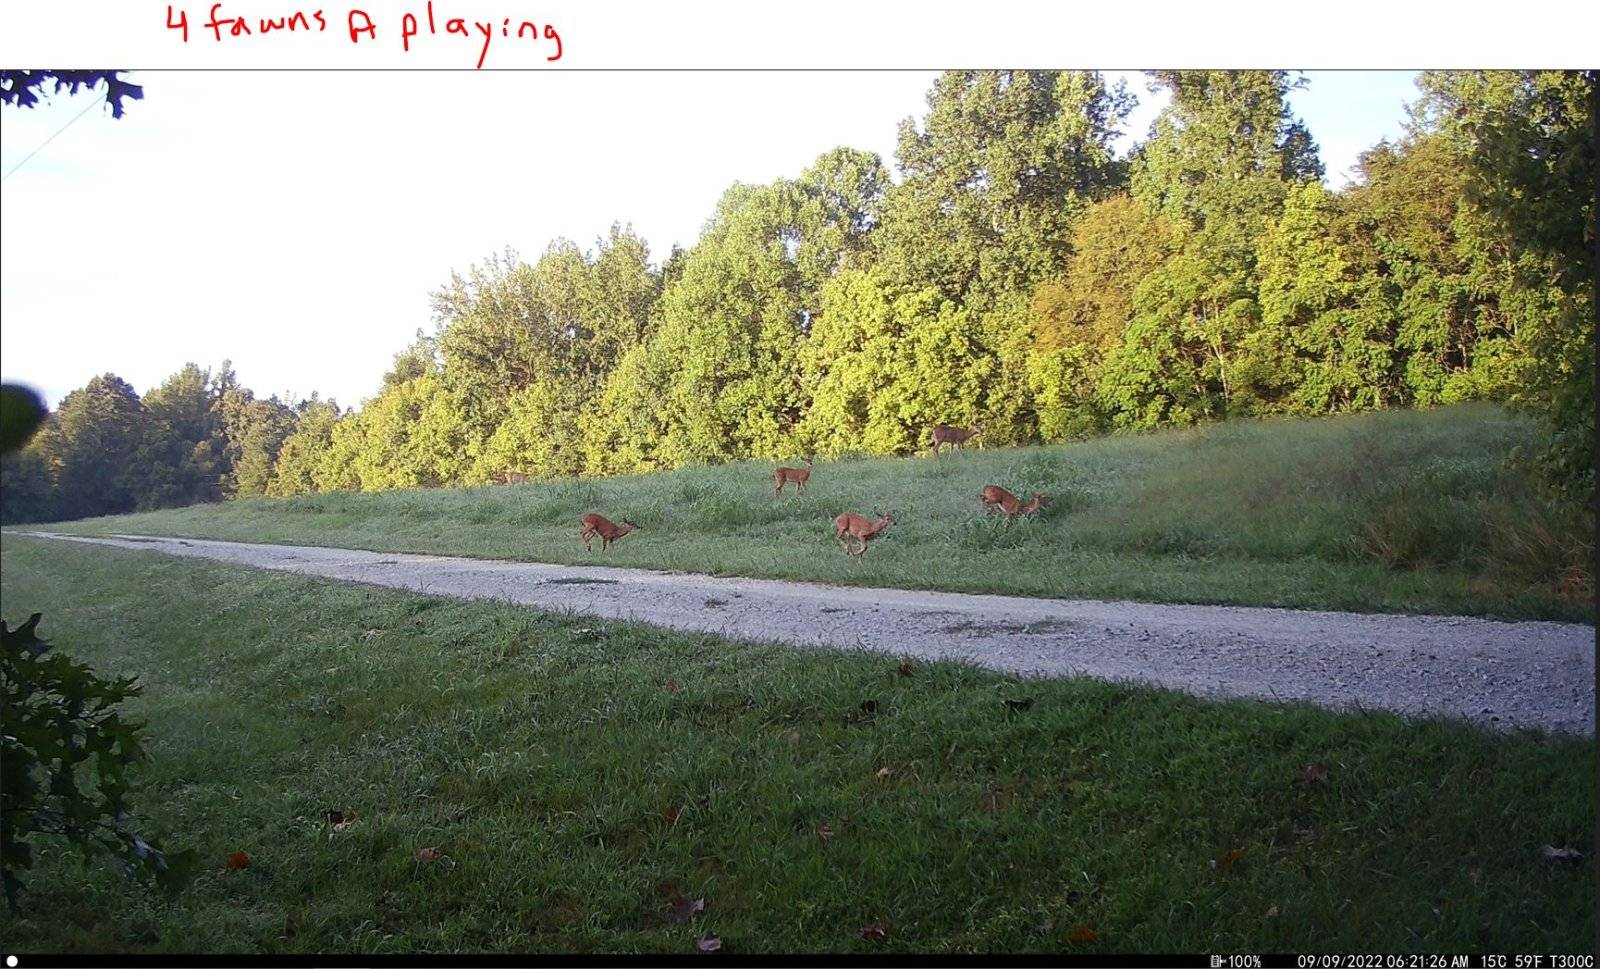 4 fawns a playing.JPG